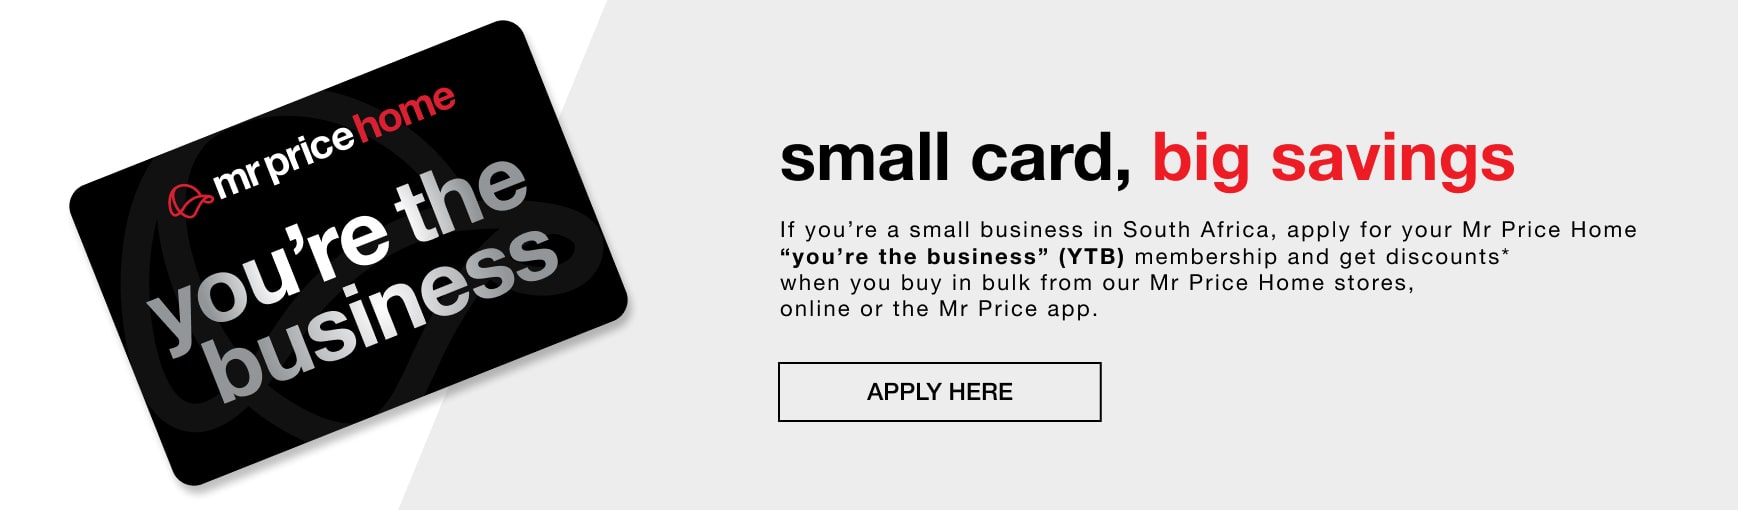 You're the business, Business to business sign up banner